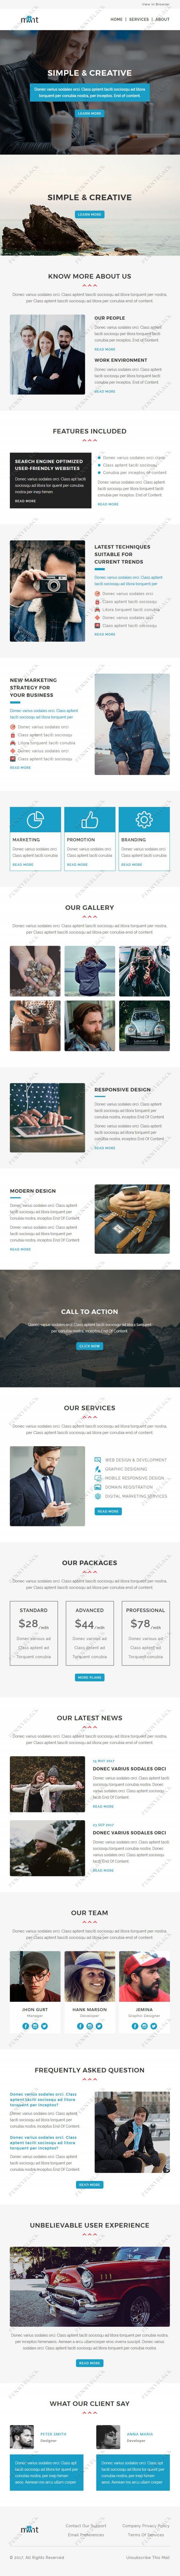 Mint - Multipurpose Responsive Email Template With Stamp Ready Builder Access